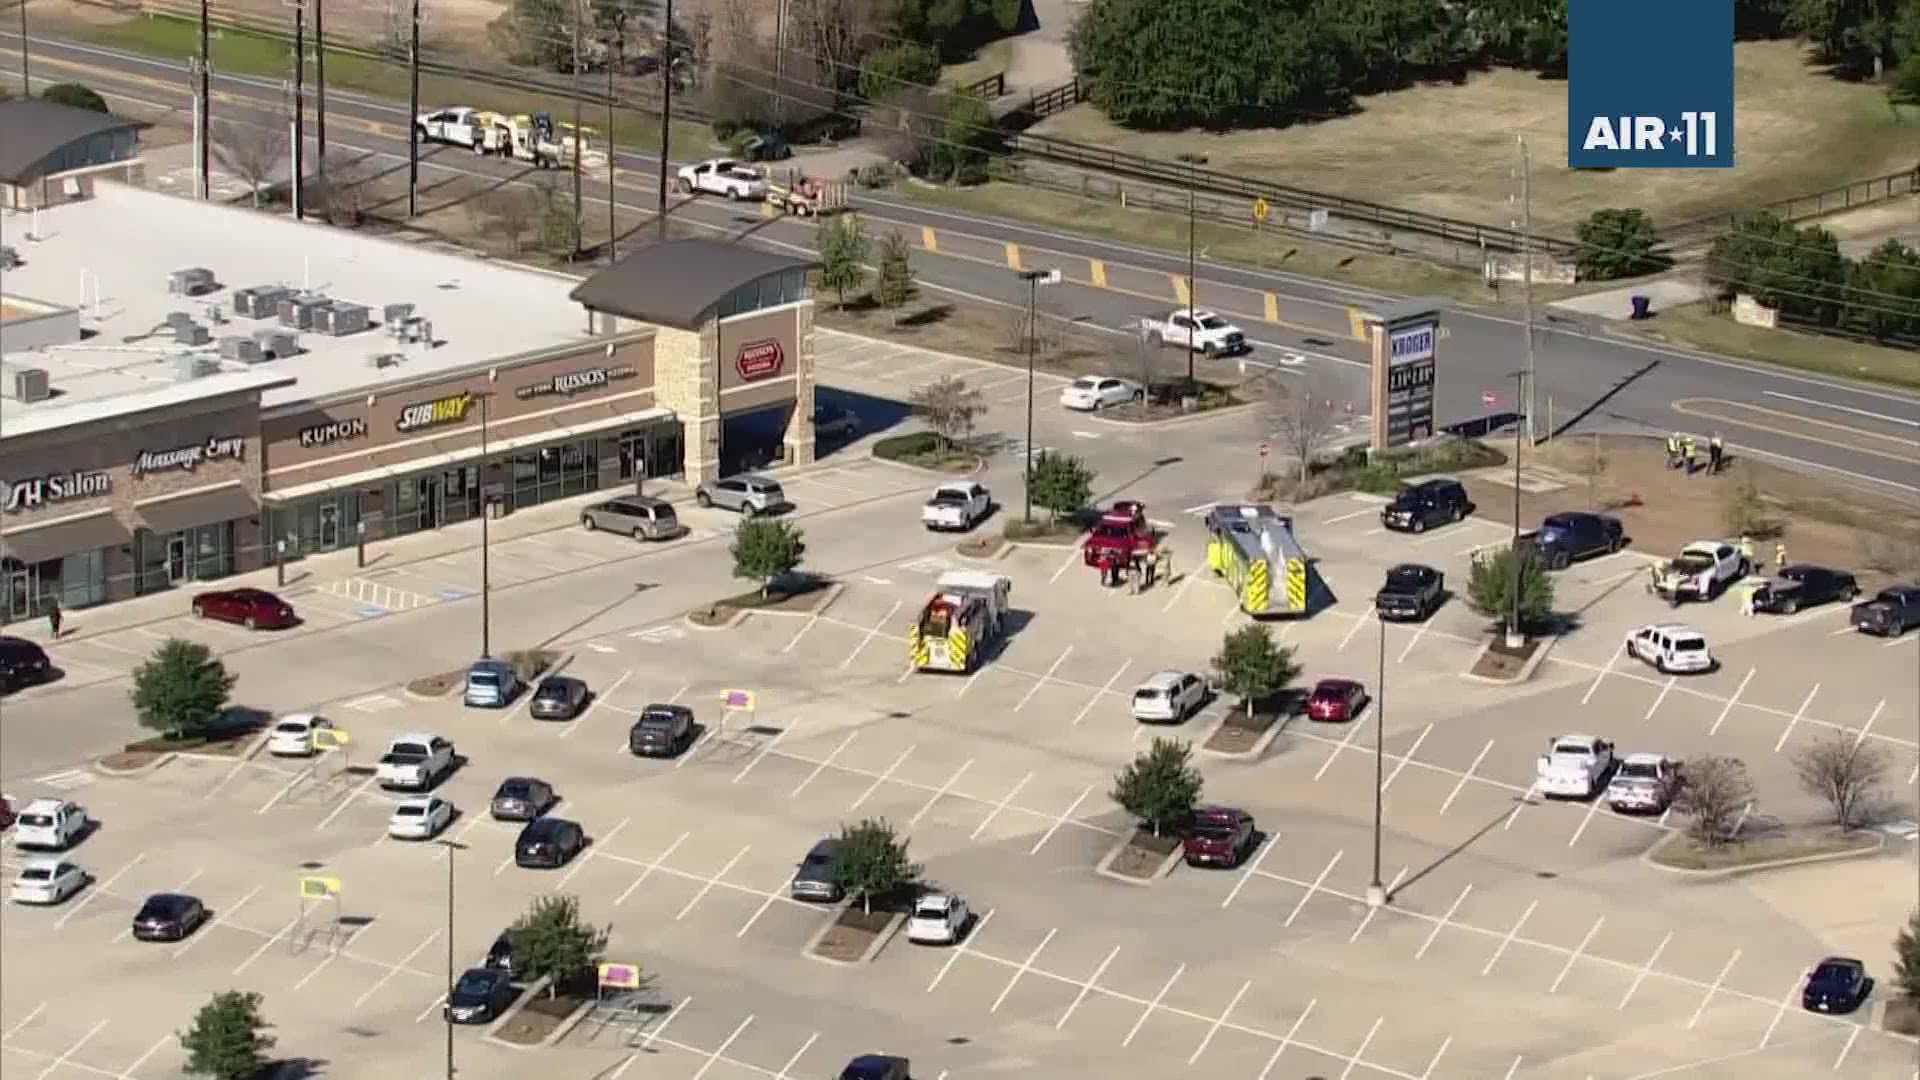 Firefighters and a HAZMAT team responded to a shopping center in the Katy area early Wednesday after reports of an odor and a gas leak.